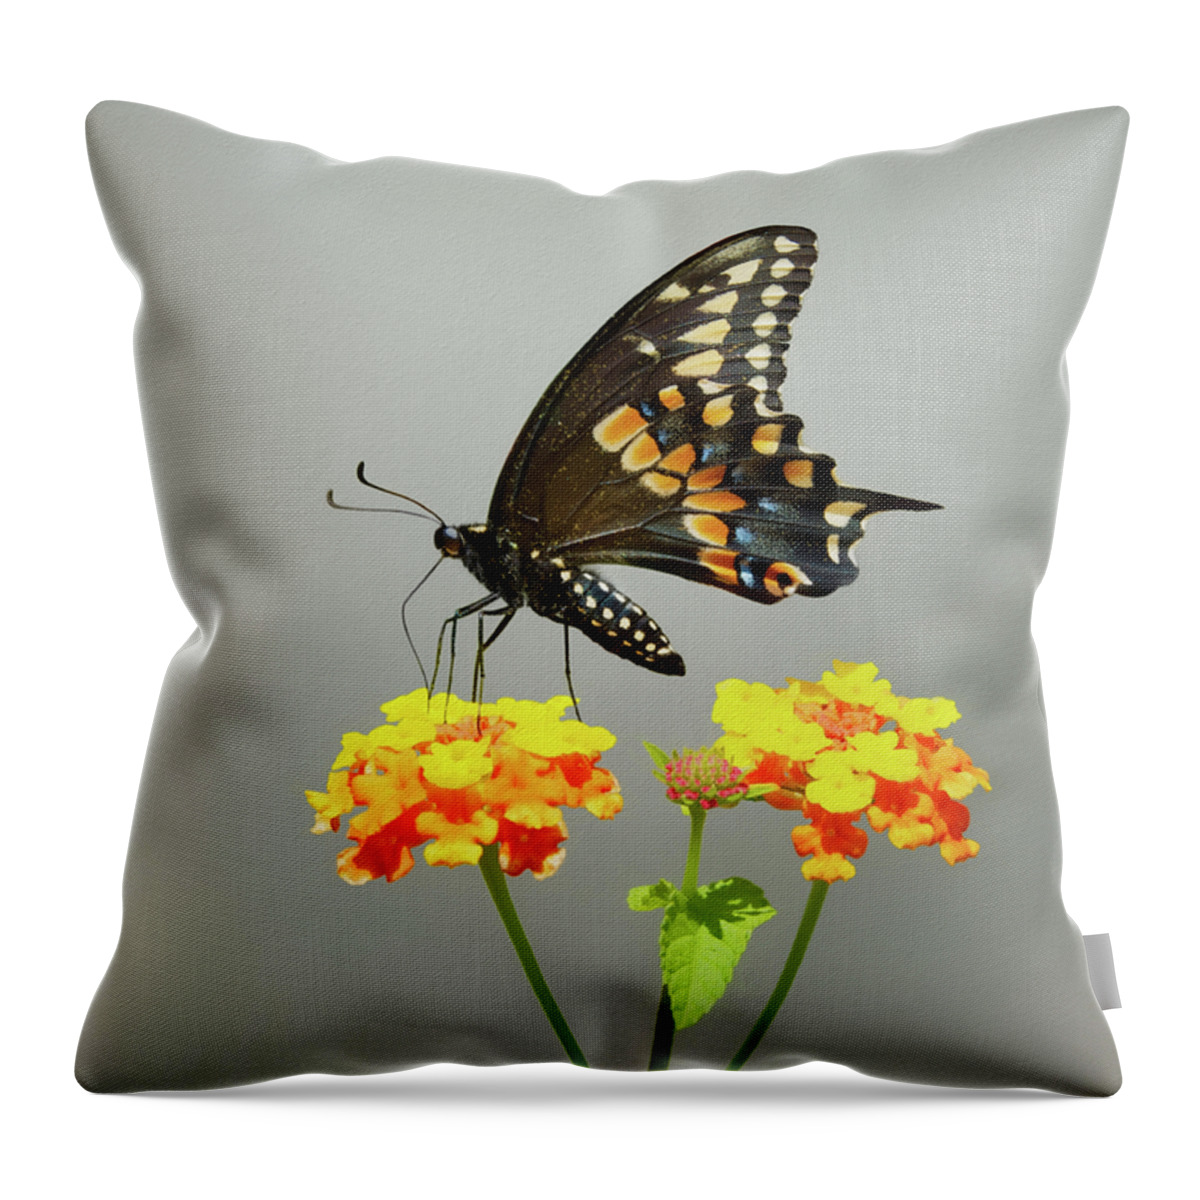 Black Butterfly Throw Pillow featuring the photograph Black Butterfly by Steven Michael